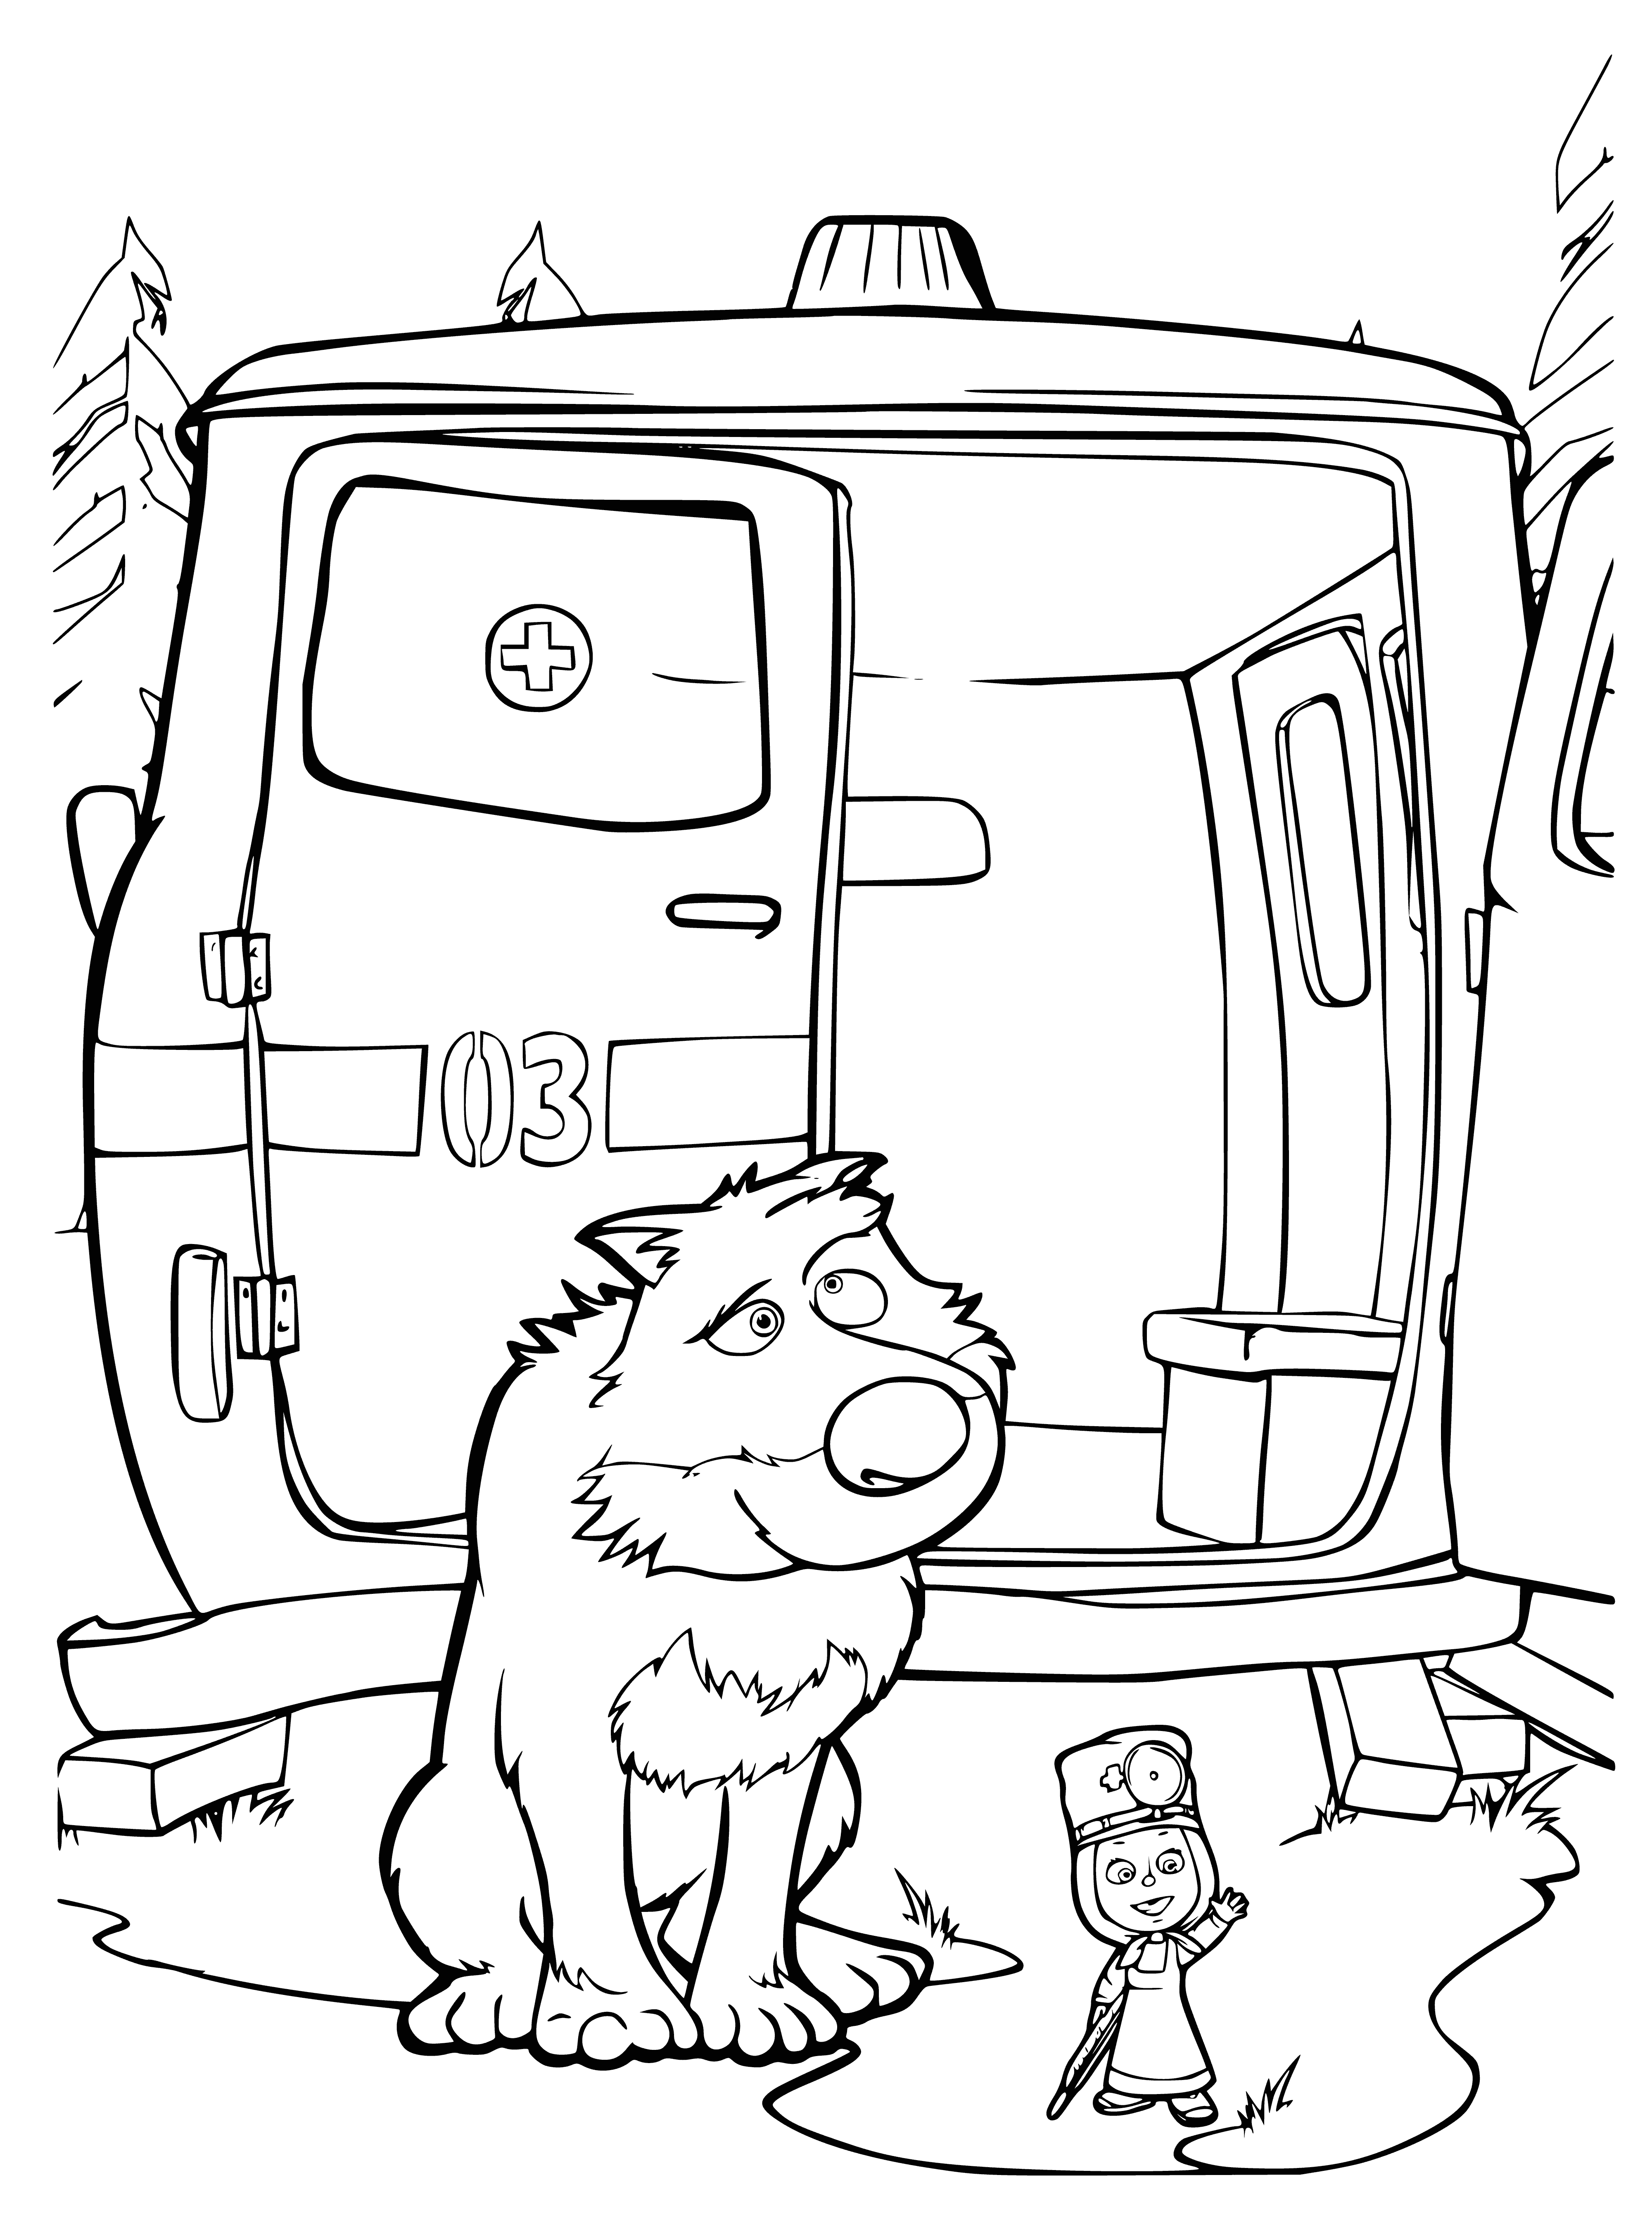 coloring page: Bear with bandage is comforted by smaller female holding tray of medical items. Large bed, door in room.